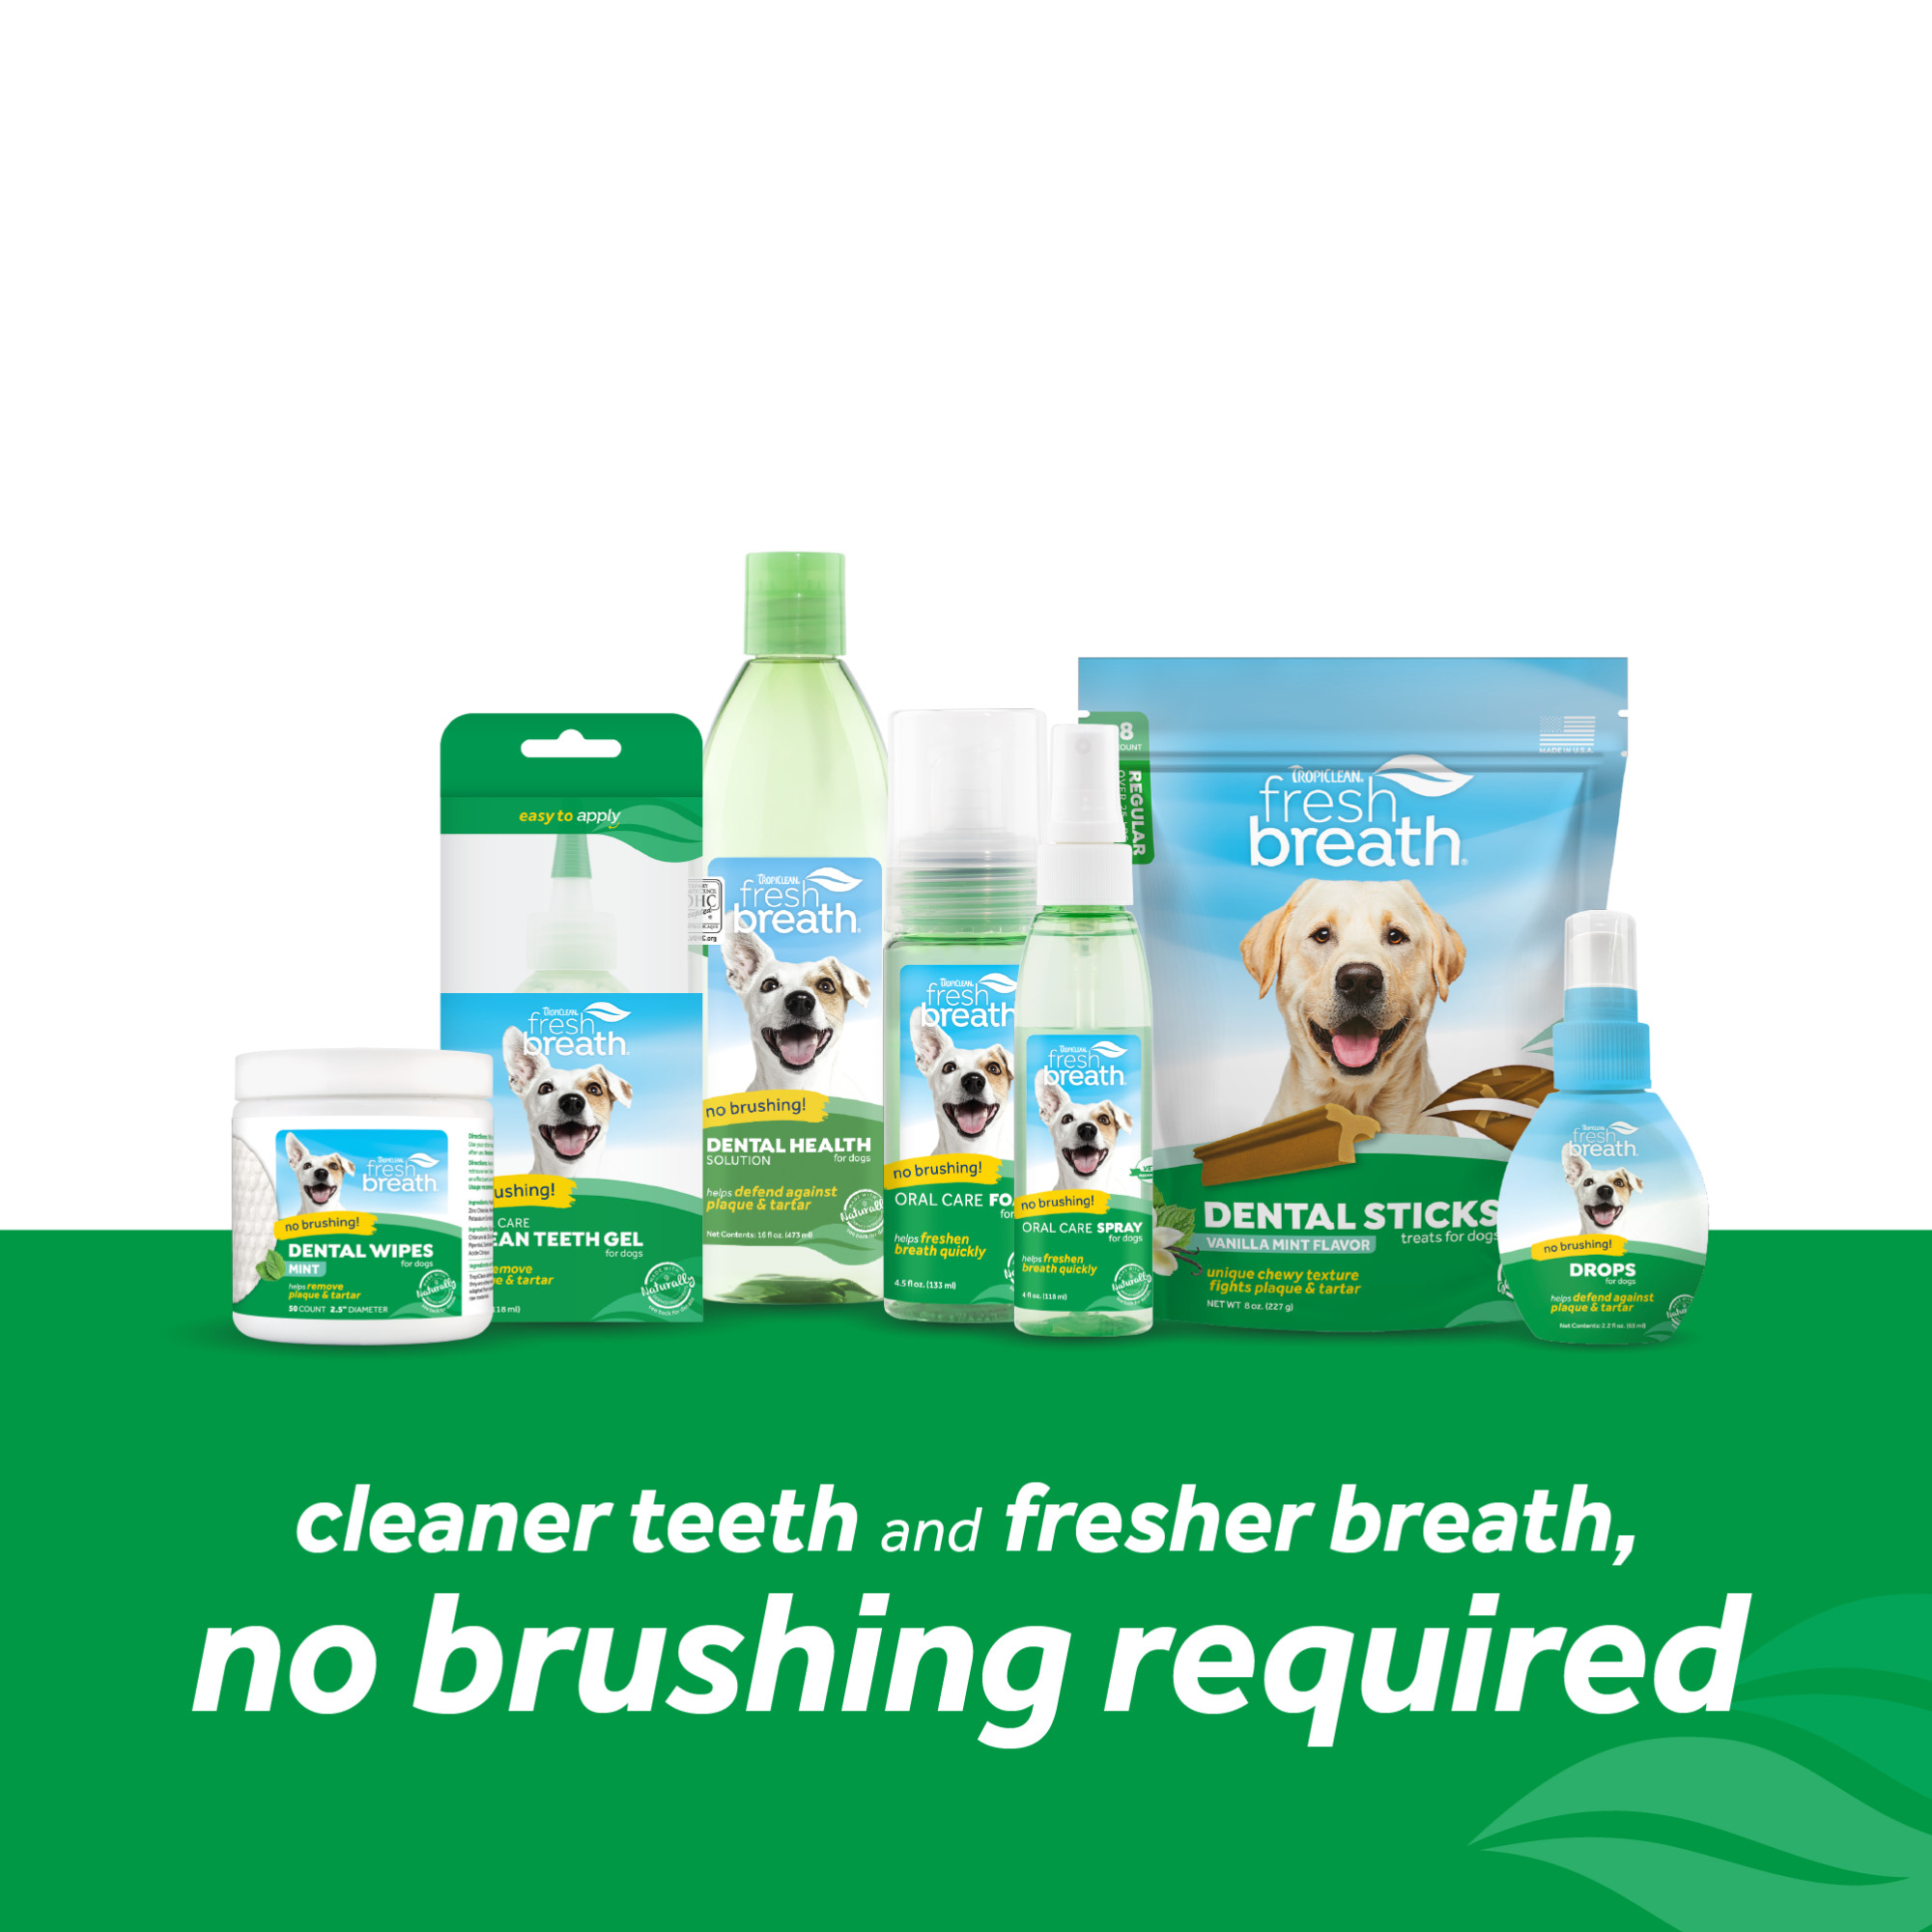 Oral Care Gel for Puppies